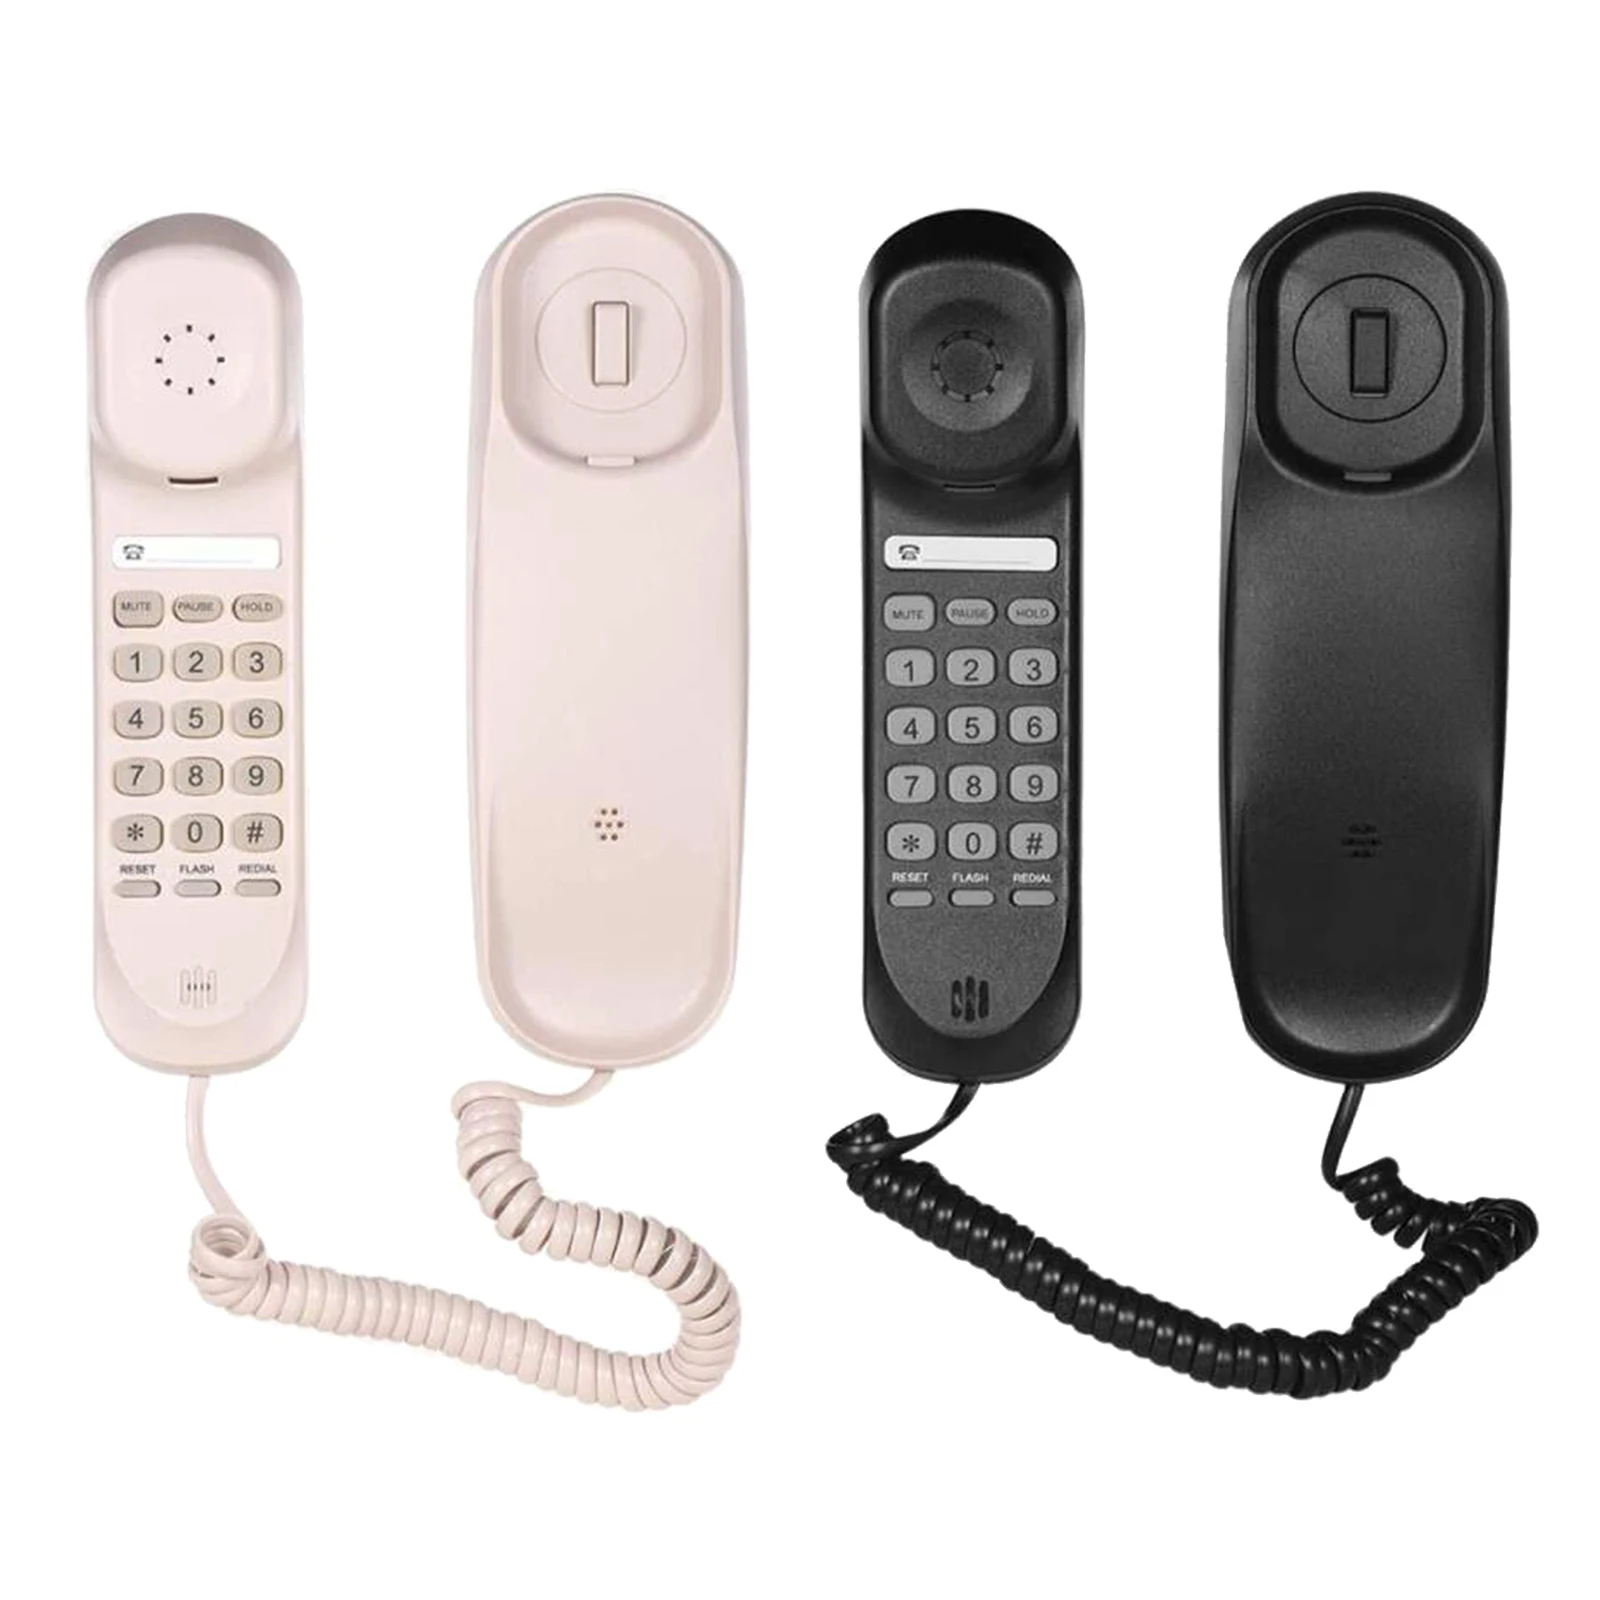 Mini Phone Wall-mount Telephone Desktop Landline Wired Hanging Telephone for Home Office Hotel Business Use